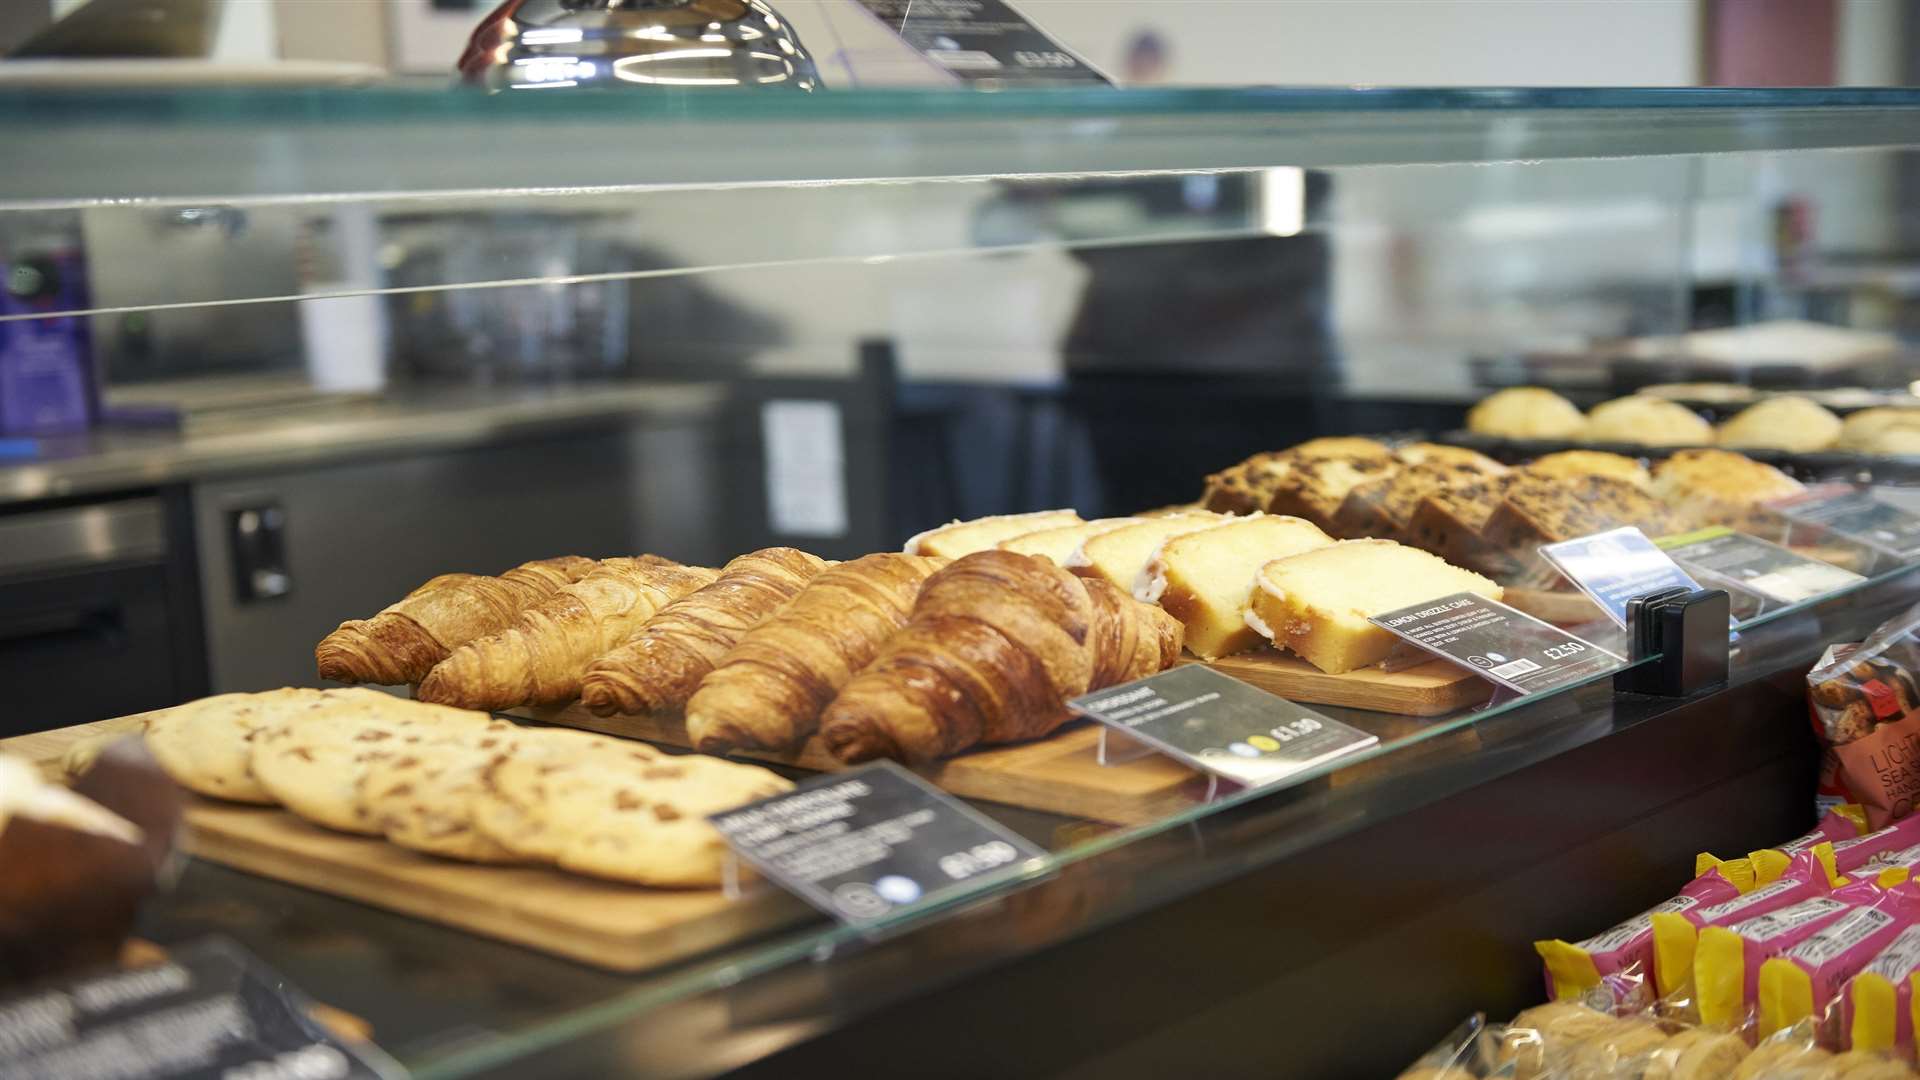 The Foodhall will have an in-store bakery